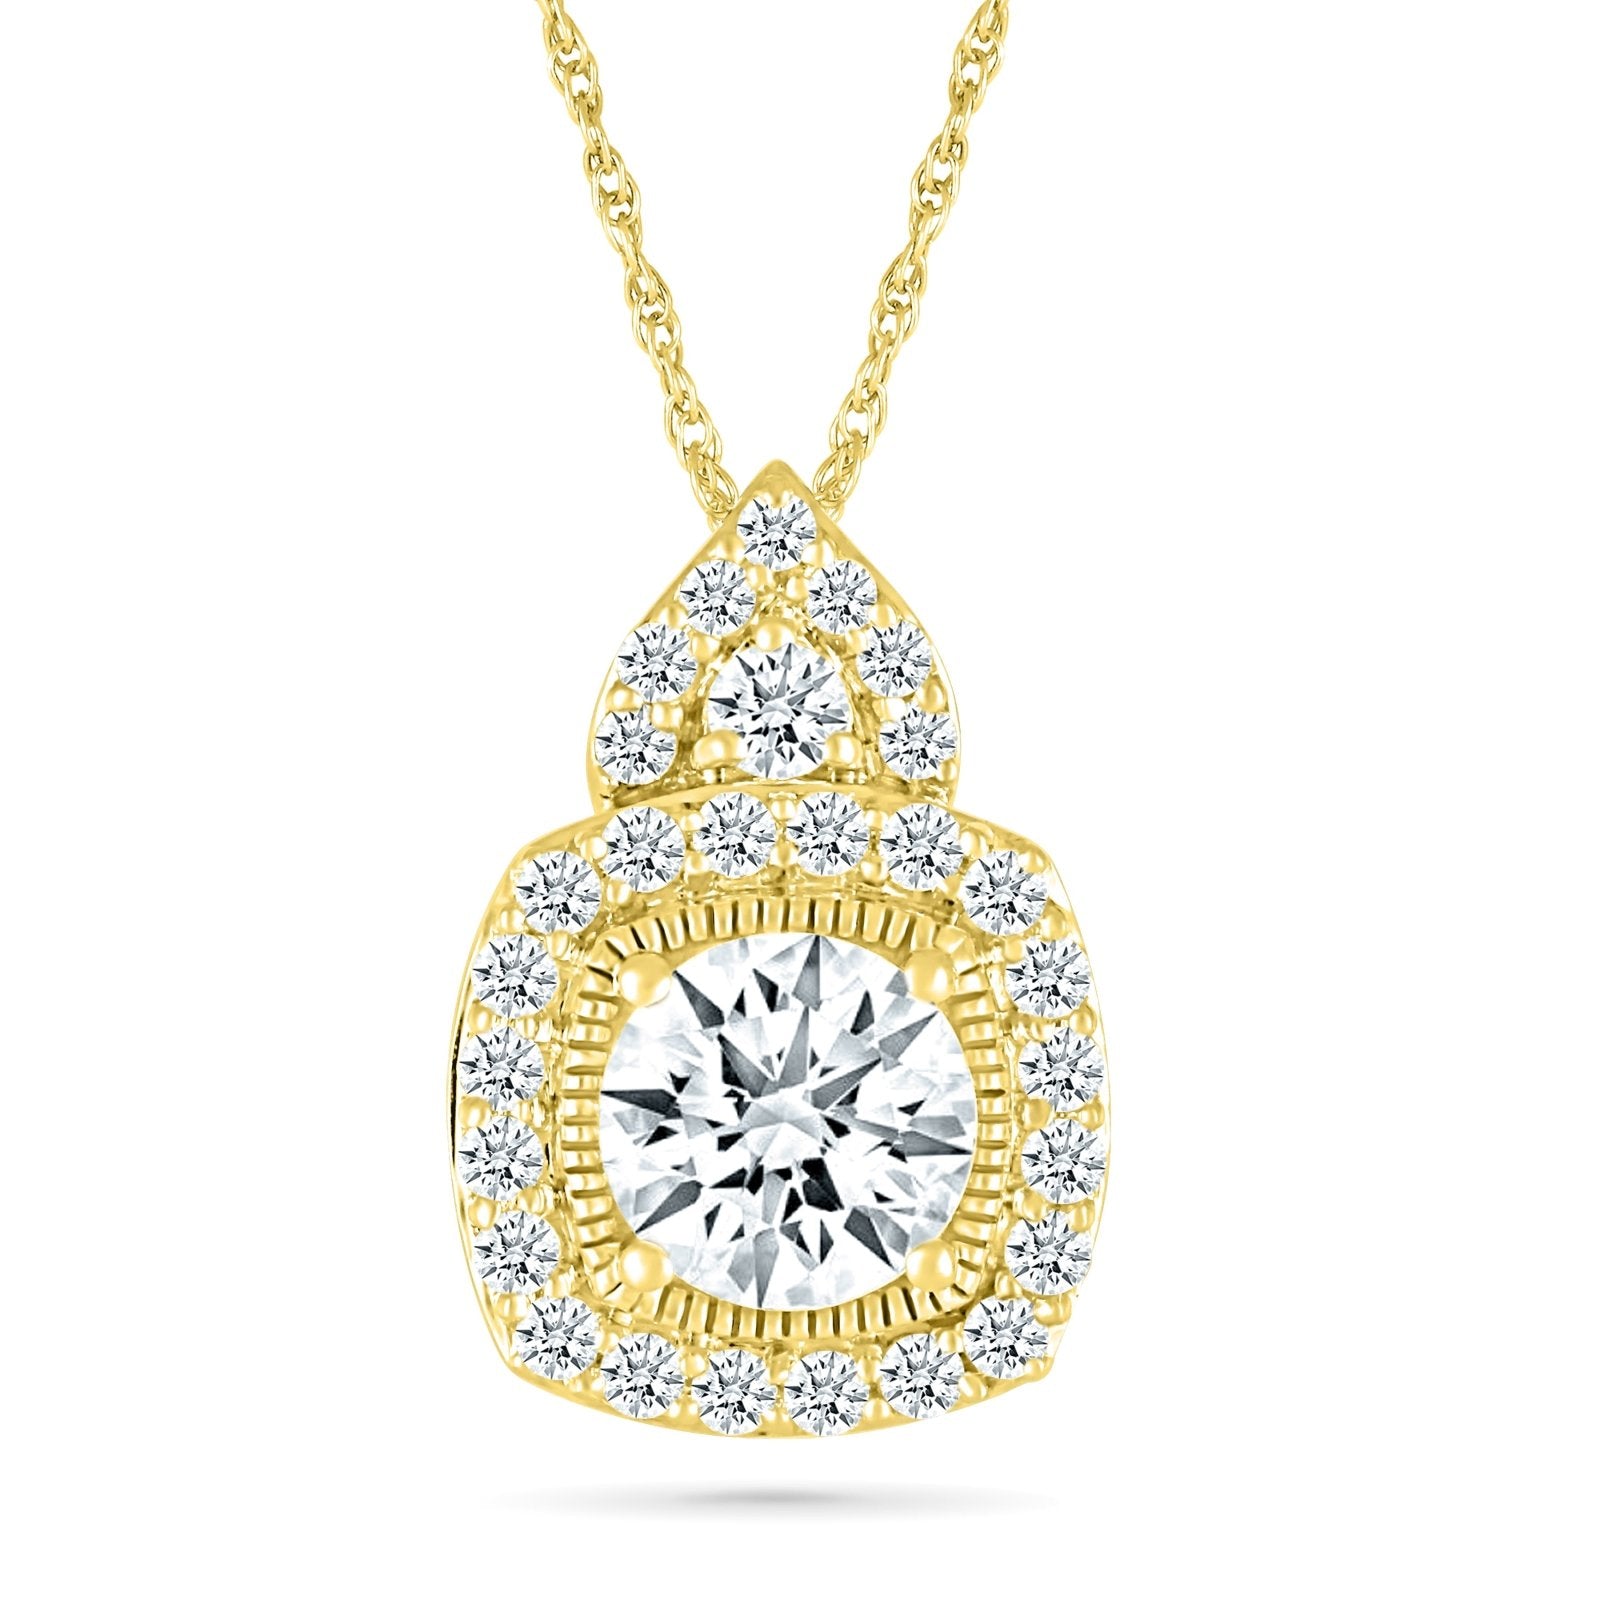 White Sapphire Pendant Necklace with White Sapphire Halo and Bail Necklaces Estella Collection #product_description# 32726 Made to Order Pendant Necklace White Sapphire #tag4# #tag5# #tag6# #tag7# #tag8# #tag9# #tag10#